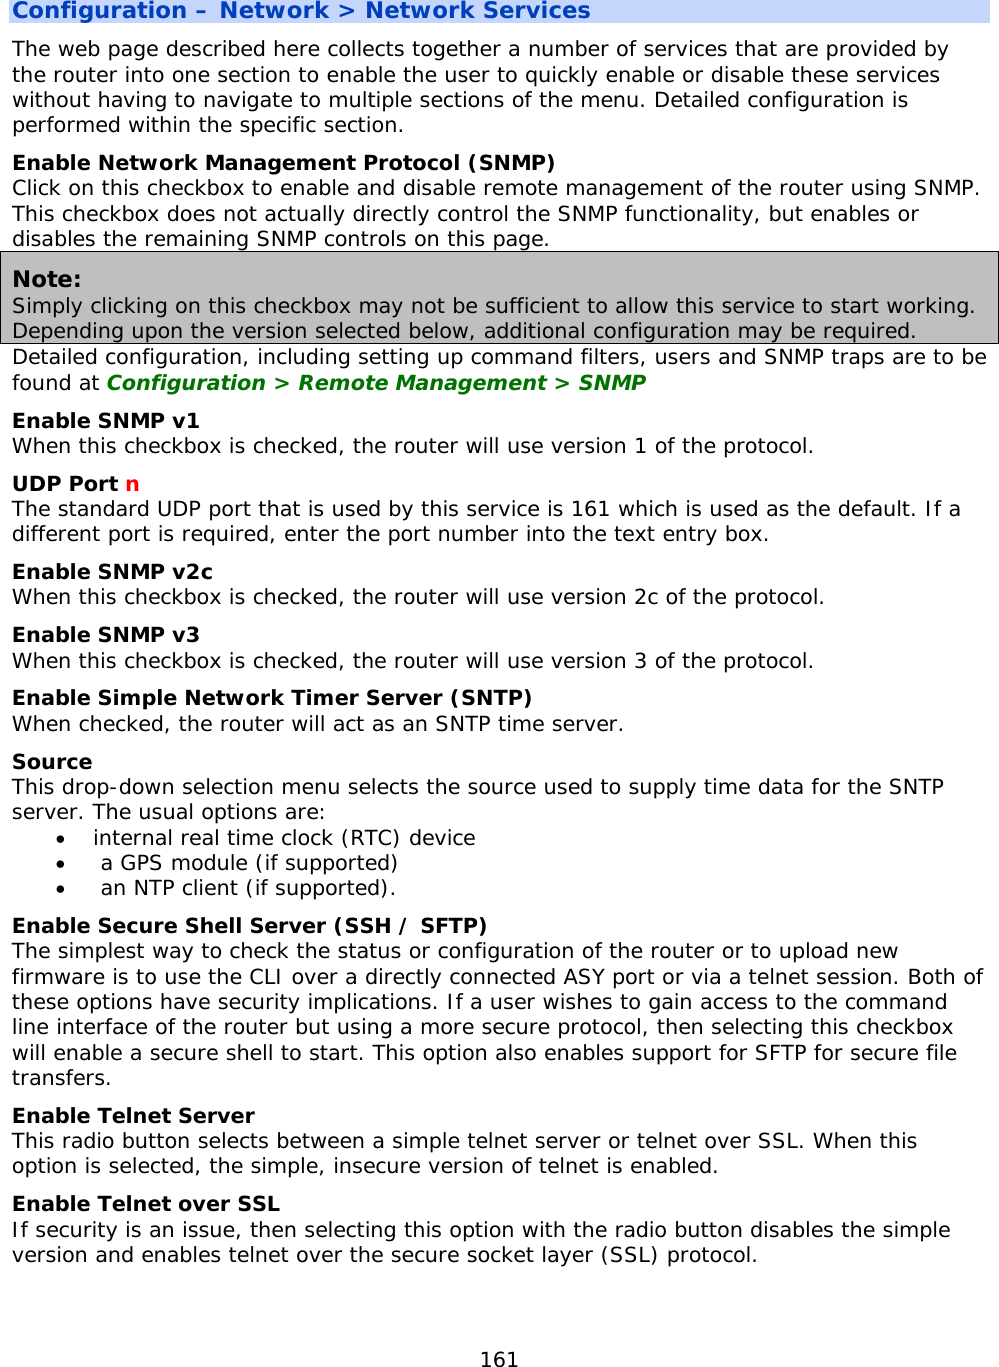 161  Configuration – Network &gt; Network Services The web page described here collects together a number of services that are provided by the router into one section to enable the user to quickly enable or disable these services without having to navigate to multiple sections of the menu. Detailed configuration is performed within the specific section. Enable Network Management Protocol (SNMP) Click on this checkbox to enable and disable remote management of the router using SNMP. This checkbox does not actually directly control the SNMP functionality, but enables or disables the remaining SNMP controls on this page. Note: Simply clicking on this checkbox may not be sufficient to allow this service to start working. Depending upon the version selected below, additional configuration may be required. Detailed configuration, including setting up command filters, users and SNMP traps are to be found at Configuration &gt; Remote Management &gt; SNMP  Enable SNMP v1 When this checkbox is checked, the router will use version 1 of the protocol. UDP Port n The standard UDP port that is used by this service is 161 which is used as the default. If a different port is required, enter the port number into the text entry box. Enable SNMP v2c When this checkbox is checked, the router will use version 2c of the protocol. Enable SNMP v3 When this checkbox is checked, the router will use version 3 of the protocol. Enable Simple Network Timer Server (SNTP) When checked, the router will act as an SNTP time server. Source This drop-down selection menu selects the source used to supply time data for the SNTP server. The usual options are: • internal real time clock (RTC) device •  a GPS module (if supported)  •  an NTP client (if supported). Enable Secure Shell Server (SSH / SFTP) The simplest way to check the status or configuration of the router or to upload new firmware is to use the CLI over a directly connected ASY port or via a telnet session. Both of these options have security implications. If a user wishes to gain access to the command line interface of the router but using a more secure protocol, then selecting this checkbox will enable a secure shell to start. This option also enables support for SFTP for secure file transfers. Enable Telnet Server This radio button selects between a simple telnet server or telnet over SSL. When this option is selected, the simple, insecure version of telnet is enabled. Enable Telnet over SSL If security is an issue, then selecting this option with the radio button disables the simple version and enables telnet over the secure socket layer (SSL) protocol.    